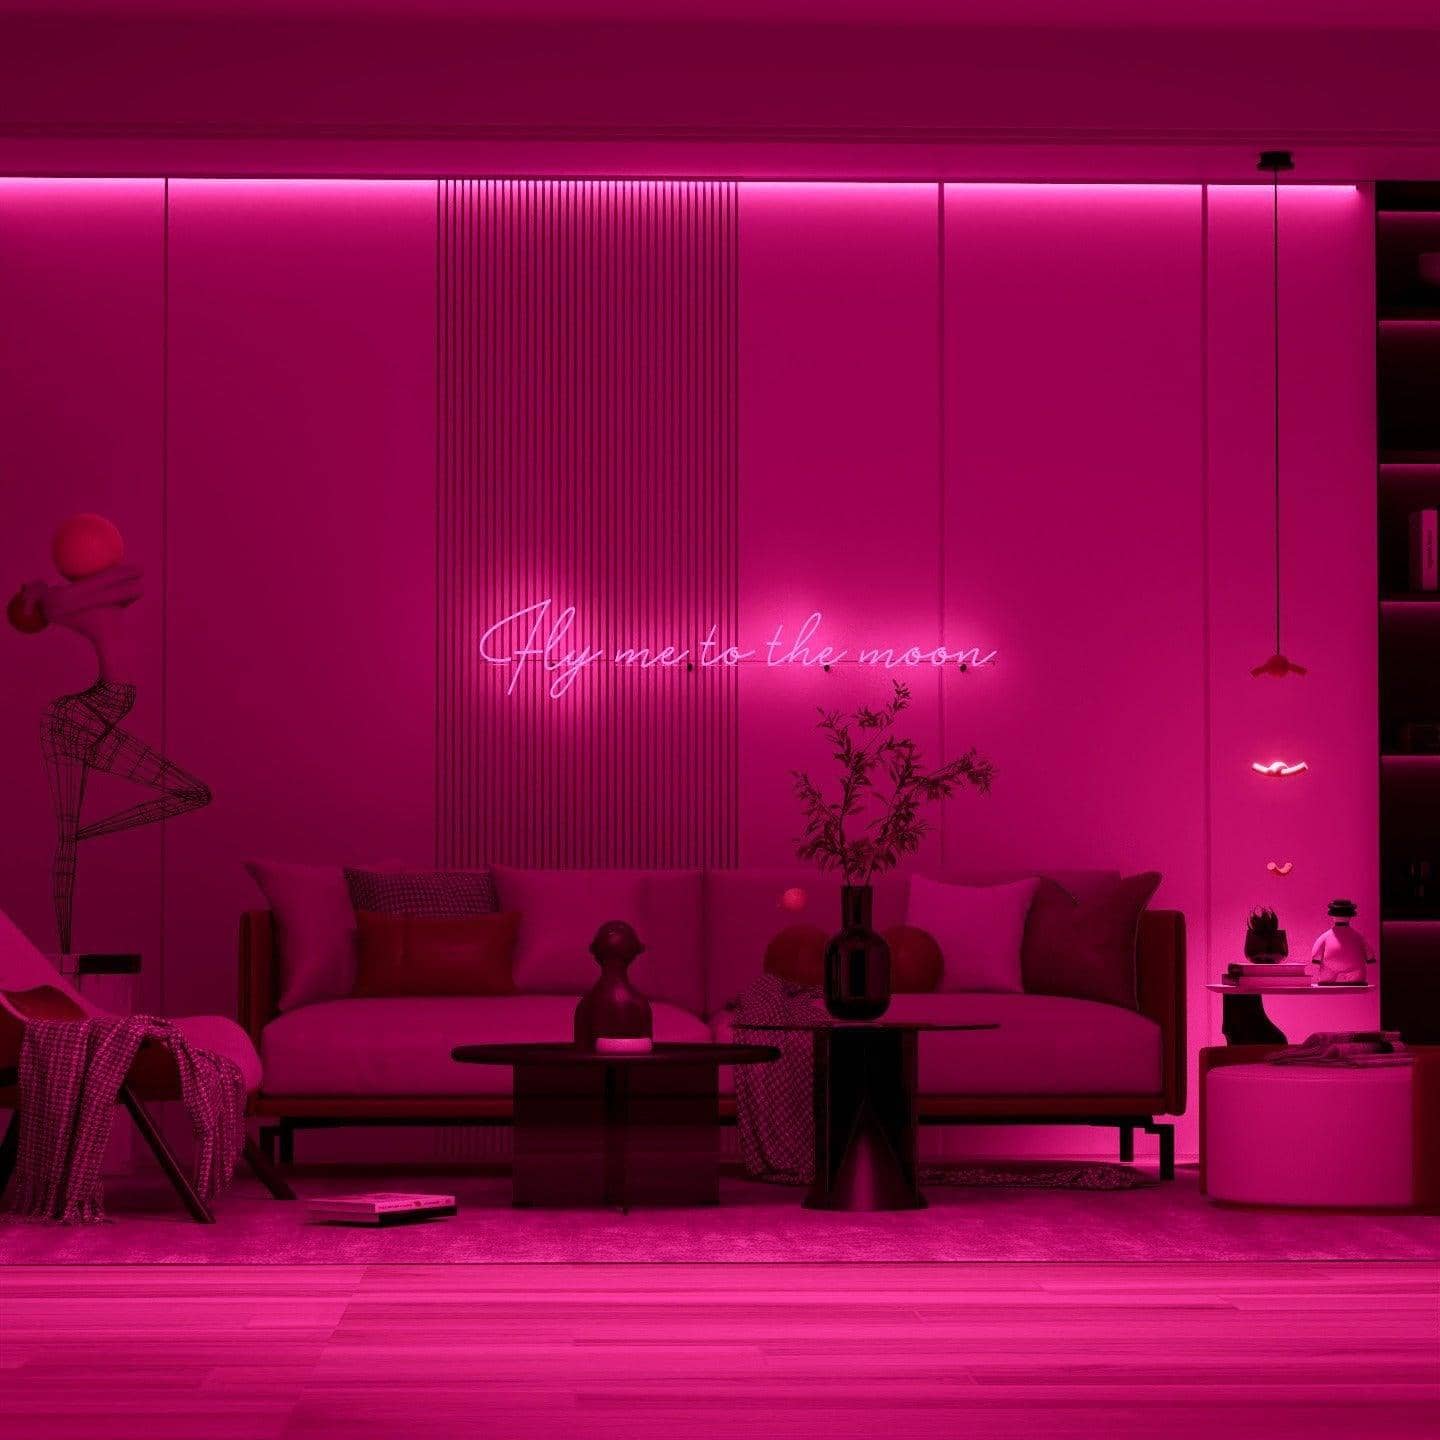 light-up-pink-neon-lights-hanging-in-the-bedroom-at-night-fly-me-to-the-moon